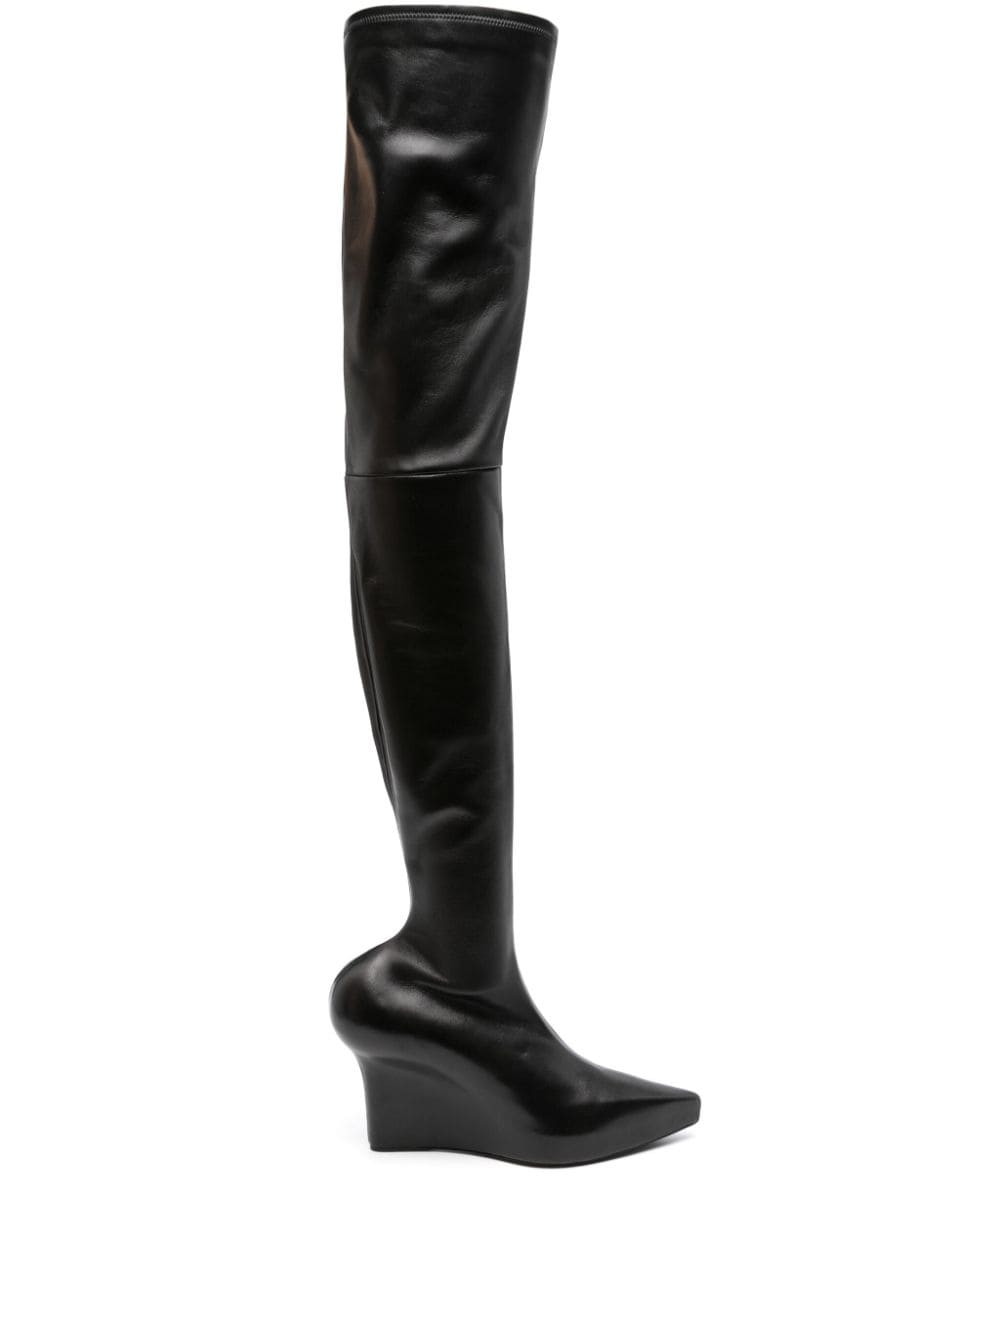 Givenchy thigh-high 80mm wedge-heel boots - Black von Givenchy